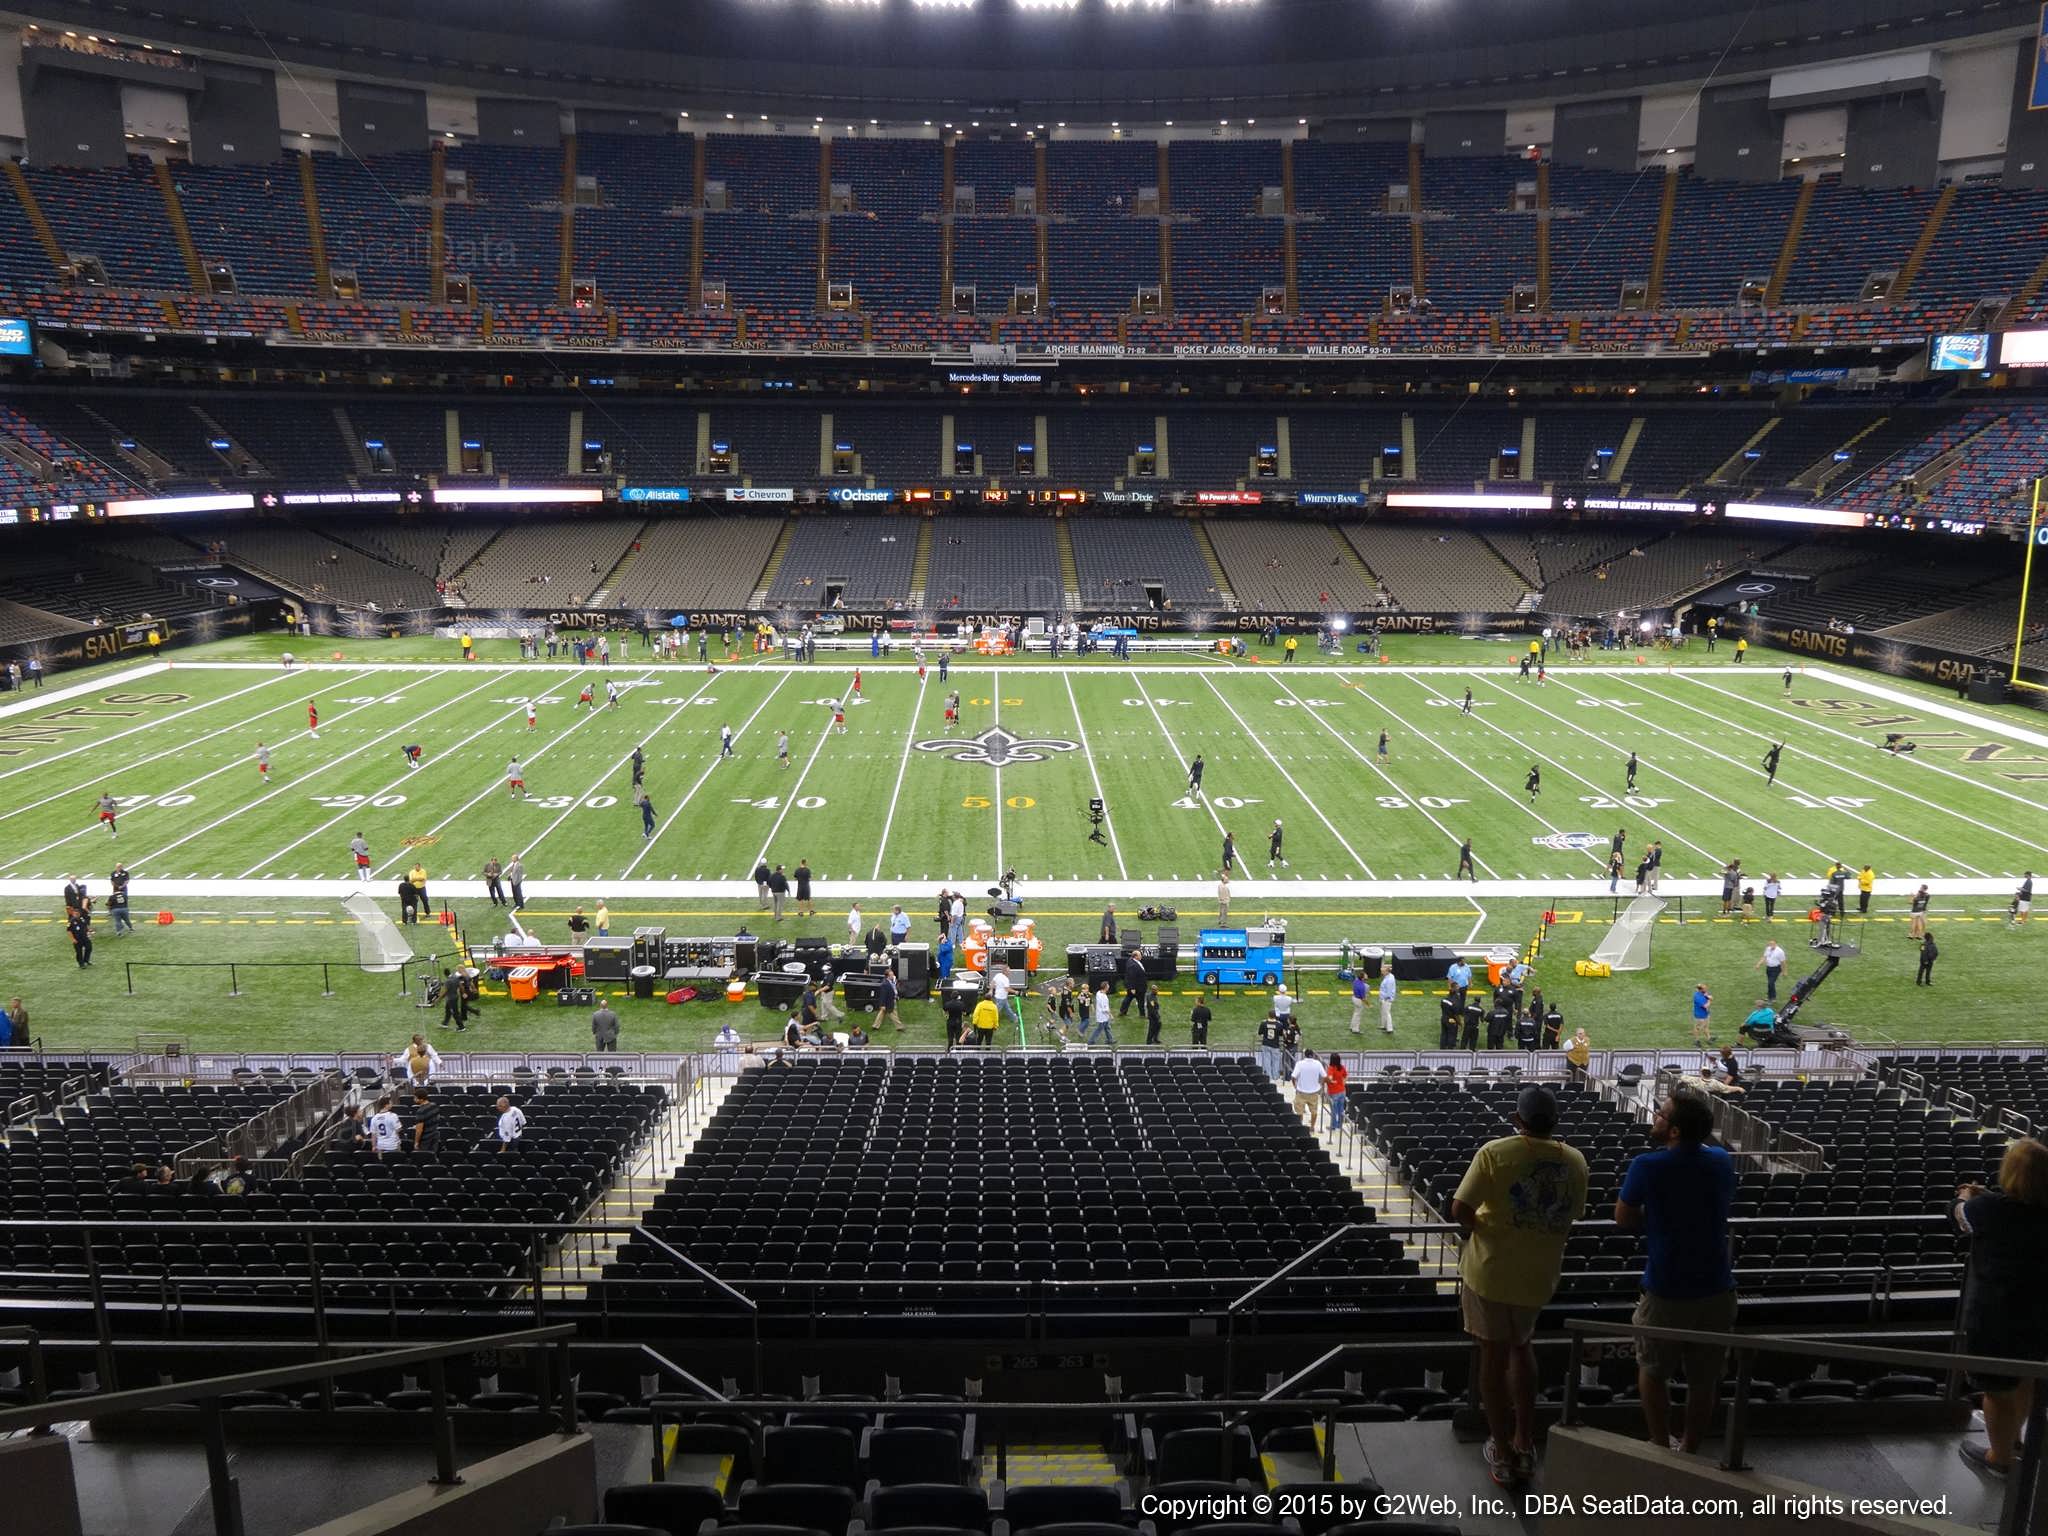 Seat view from section 336 at the Mercedes-Benz Superdome, home of the New Orleans Saints